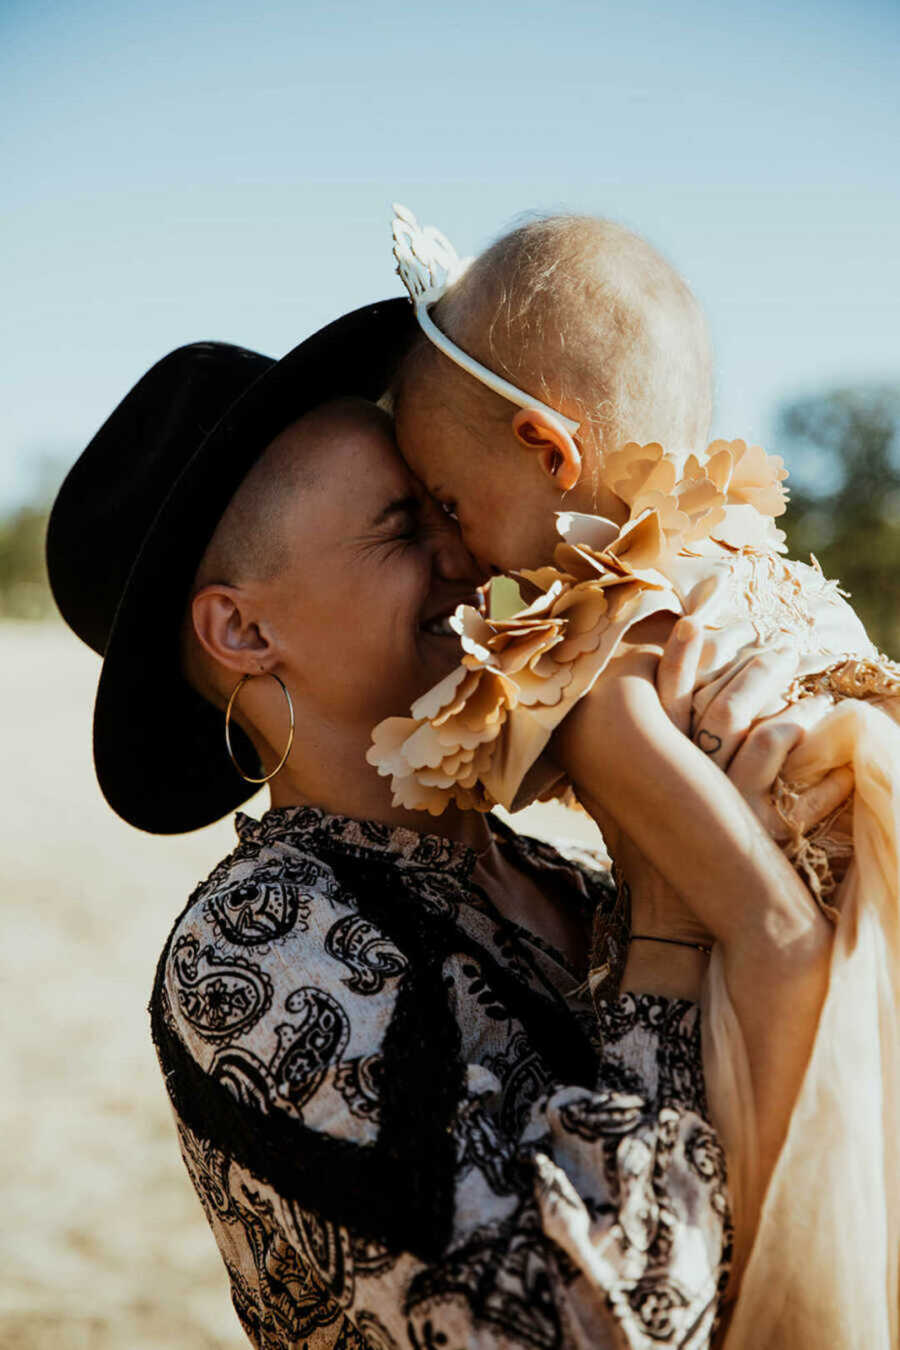 Mom snuggling daughter with leukemia